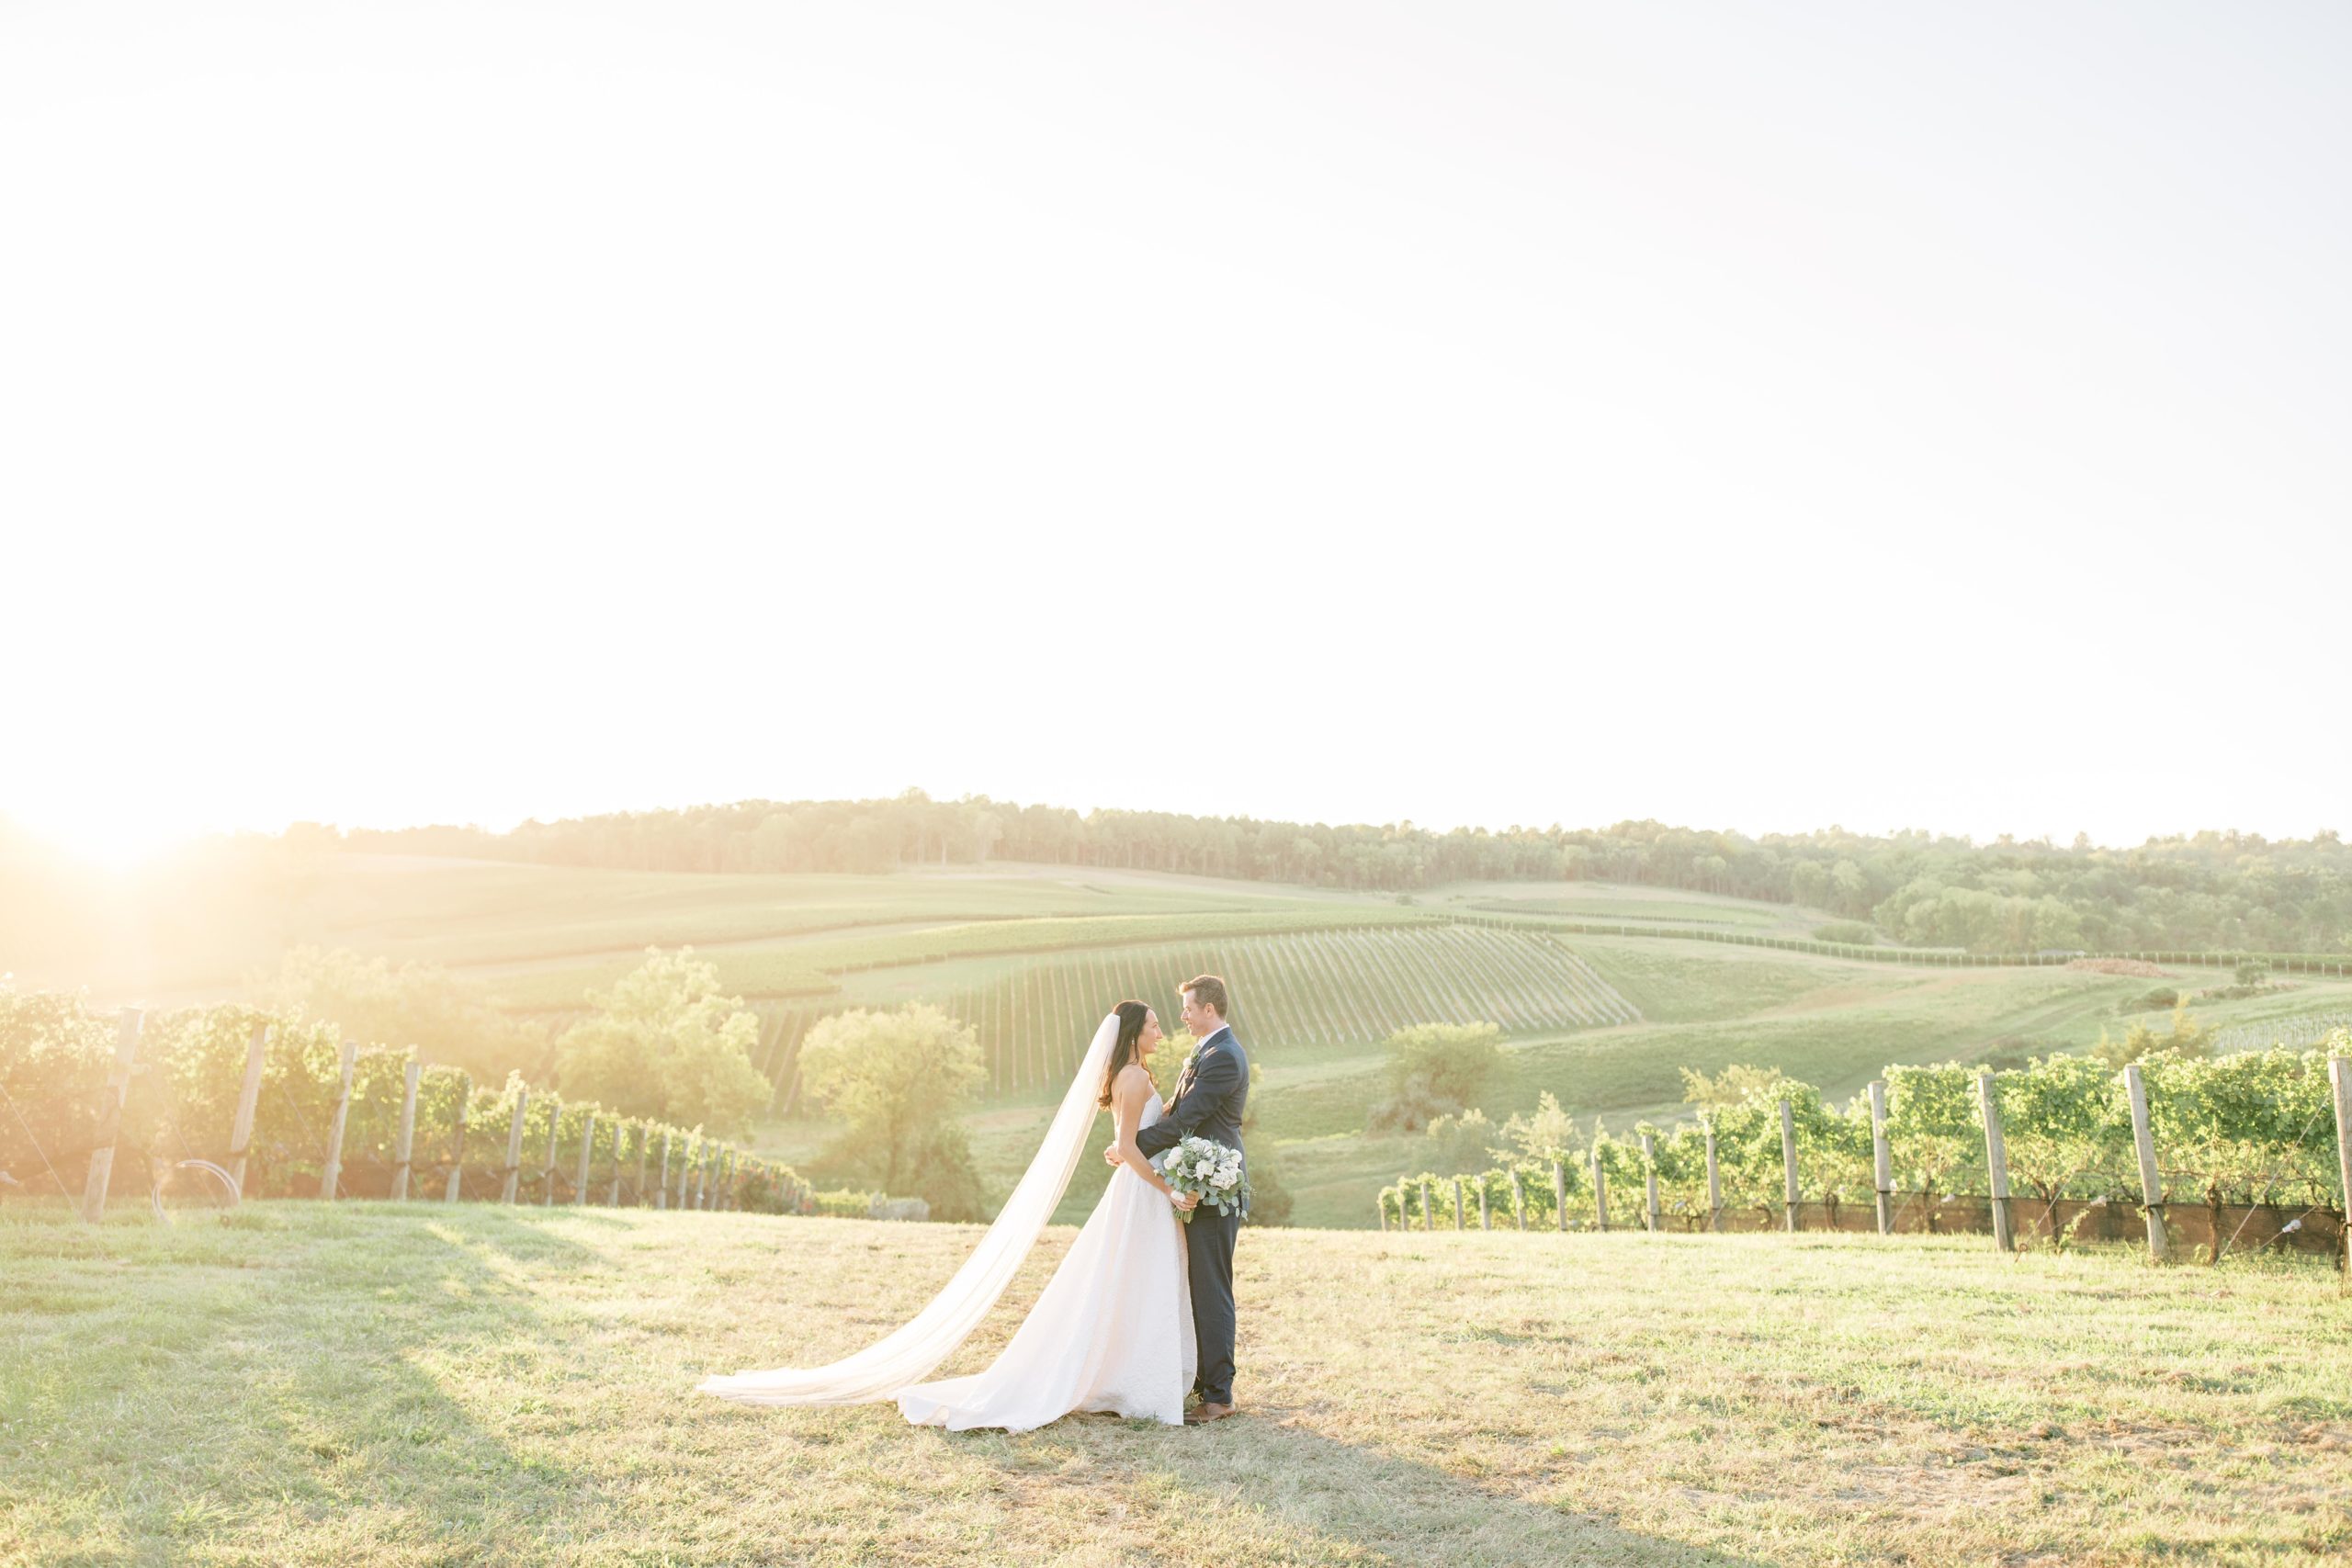 A beautiful outdoor ceremony and reception among the vines at Stone Tower Winery in Leesburg, Virignia, outside of Washington, DC.